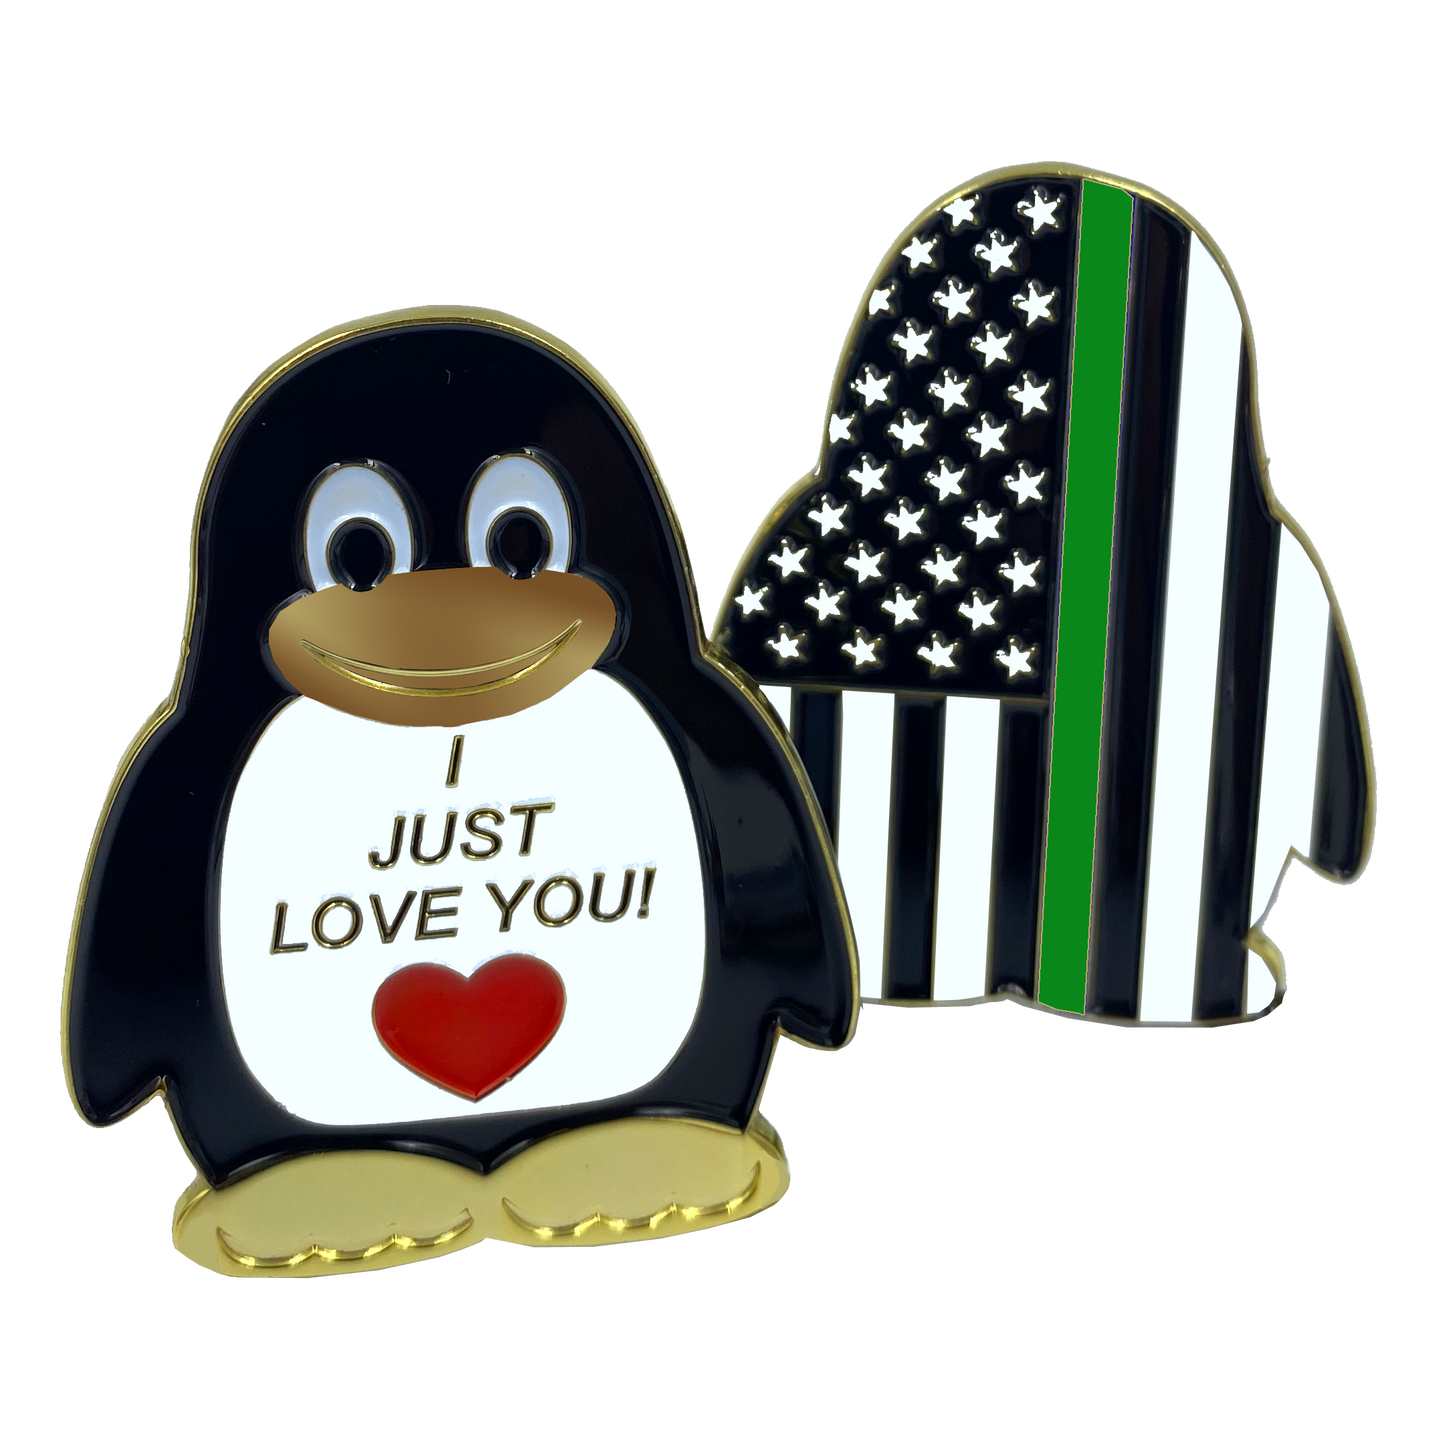 CL2-06 Penguin "I Just Love You" Police Thin Green Line challenge coin Border Patrol Sheriff Deputy Officer Military